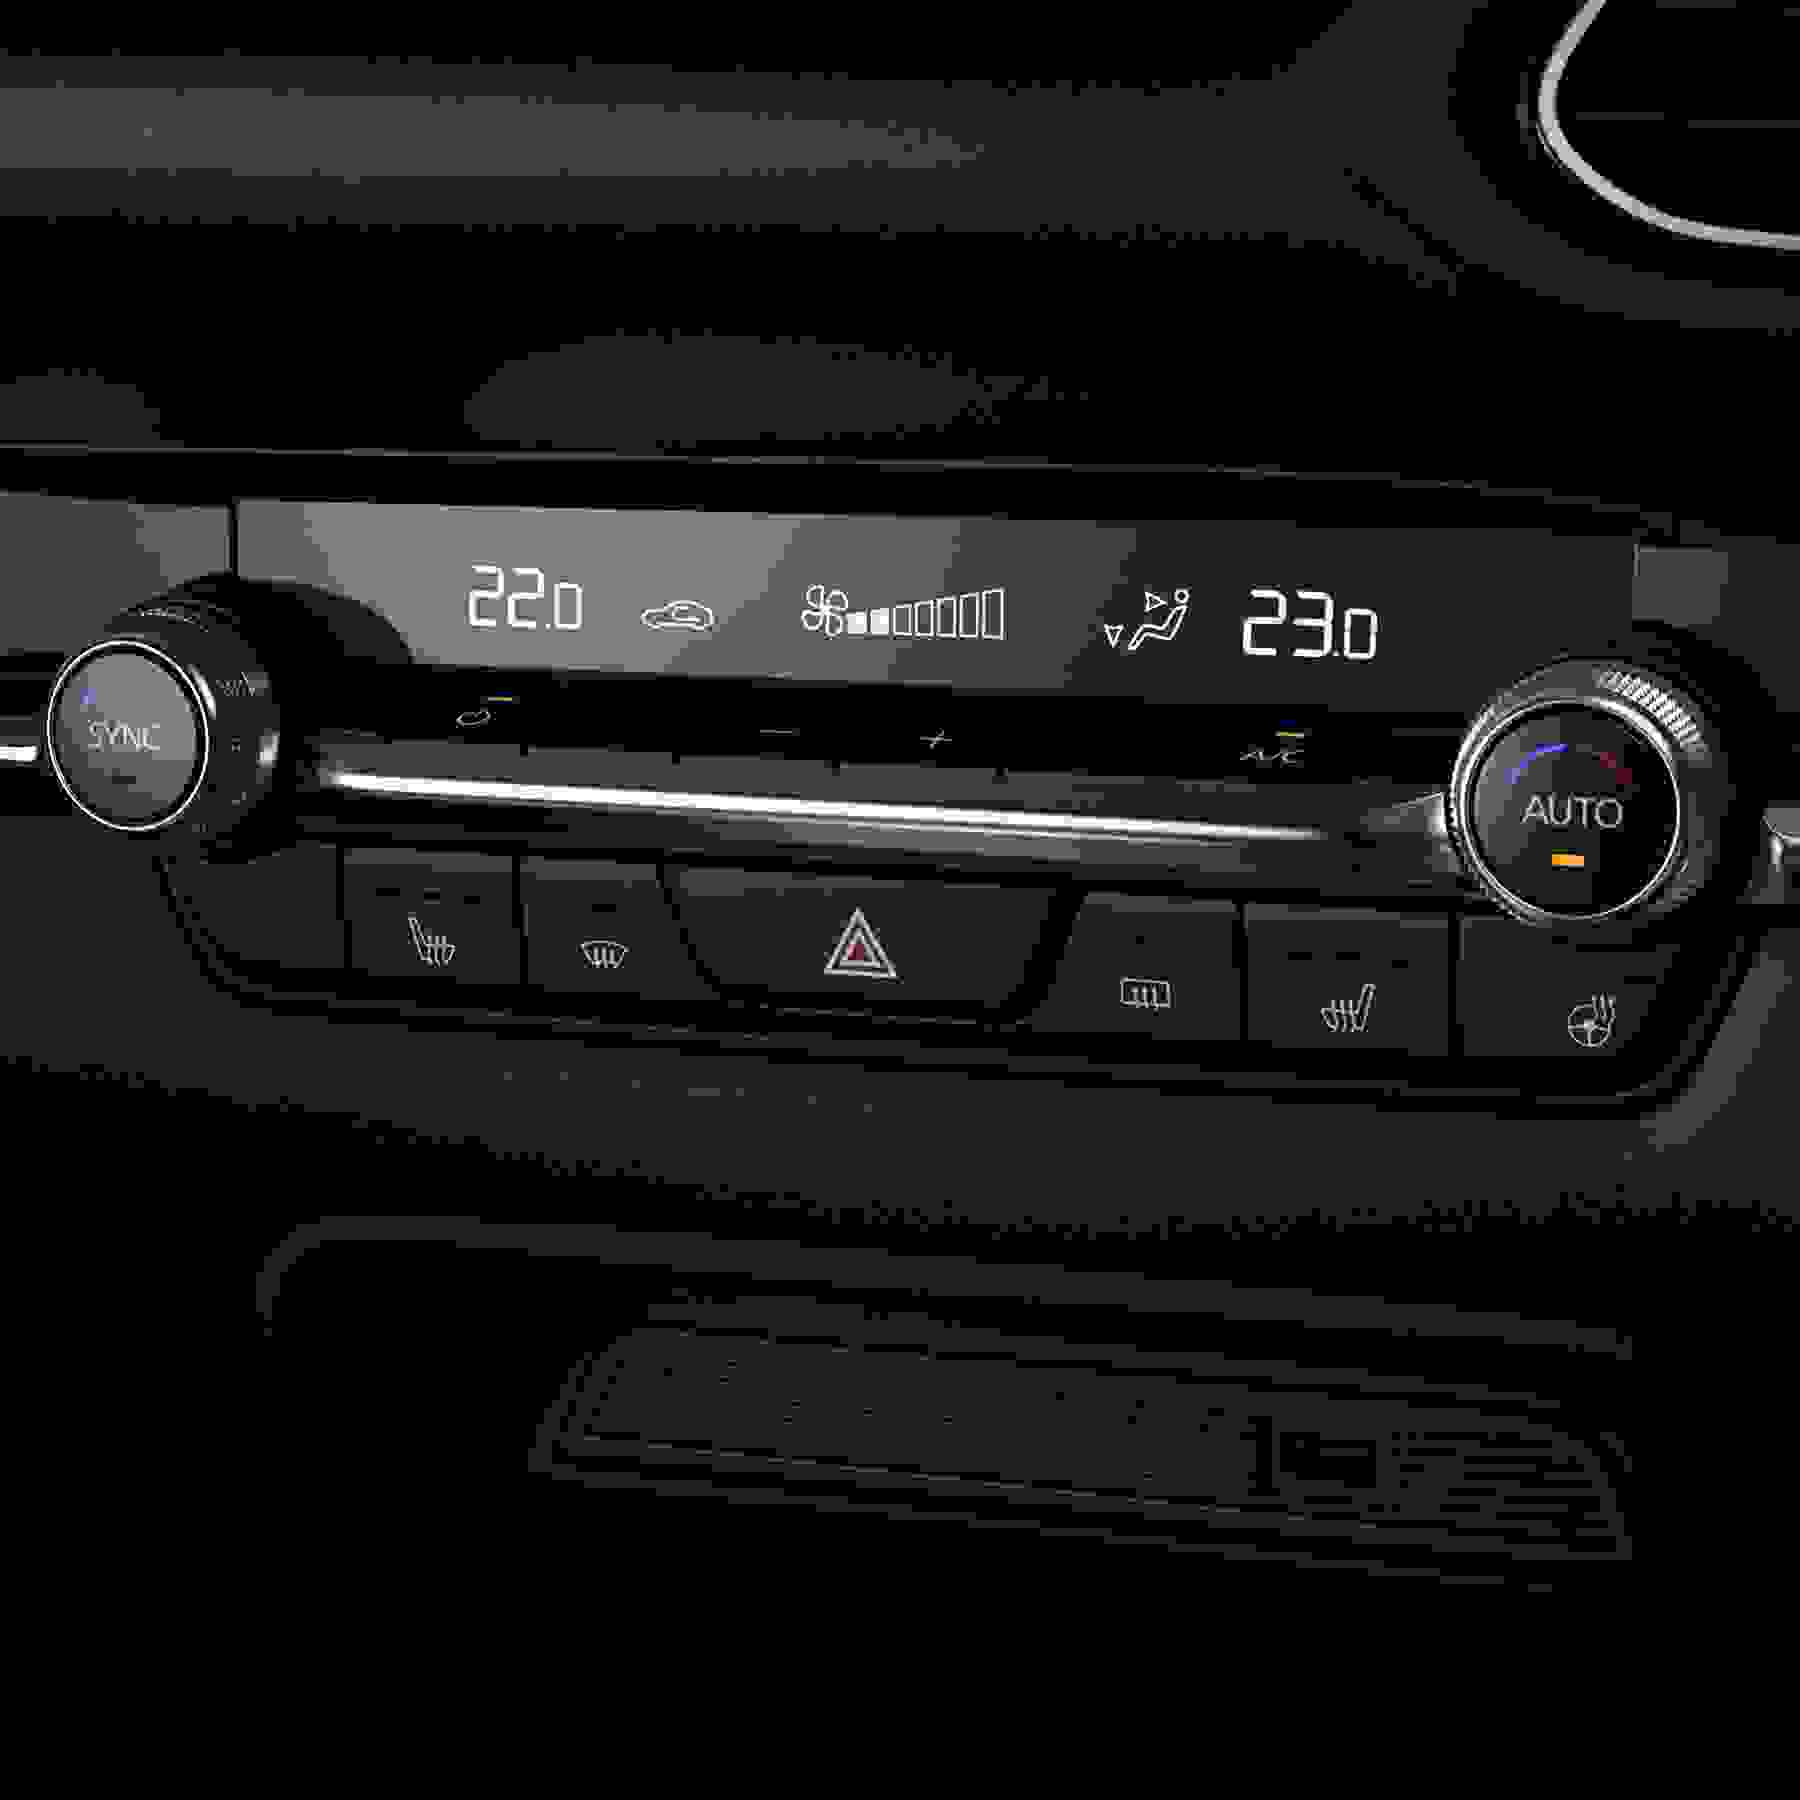 DUAL-ZONE CLIMATE CONTROL